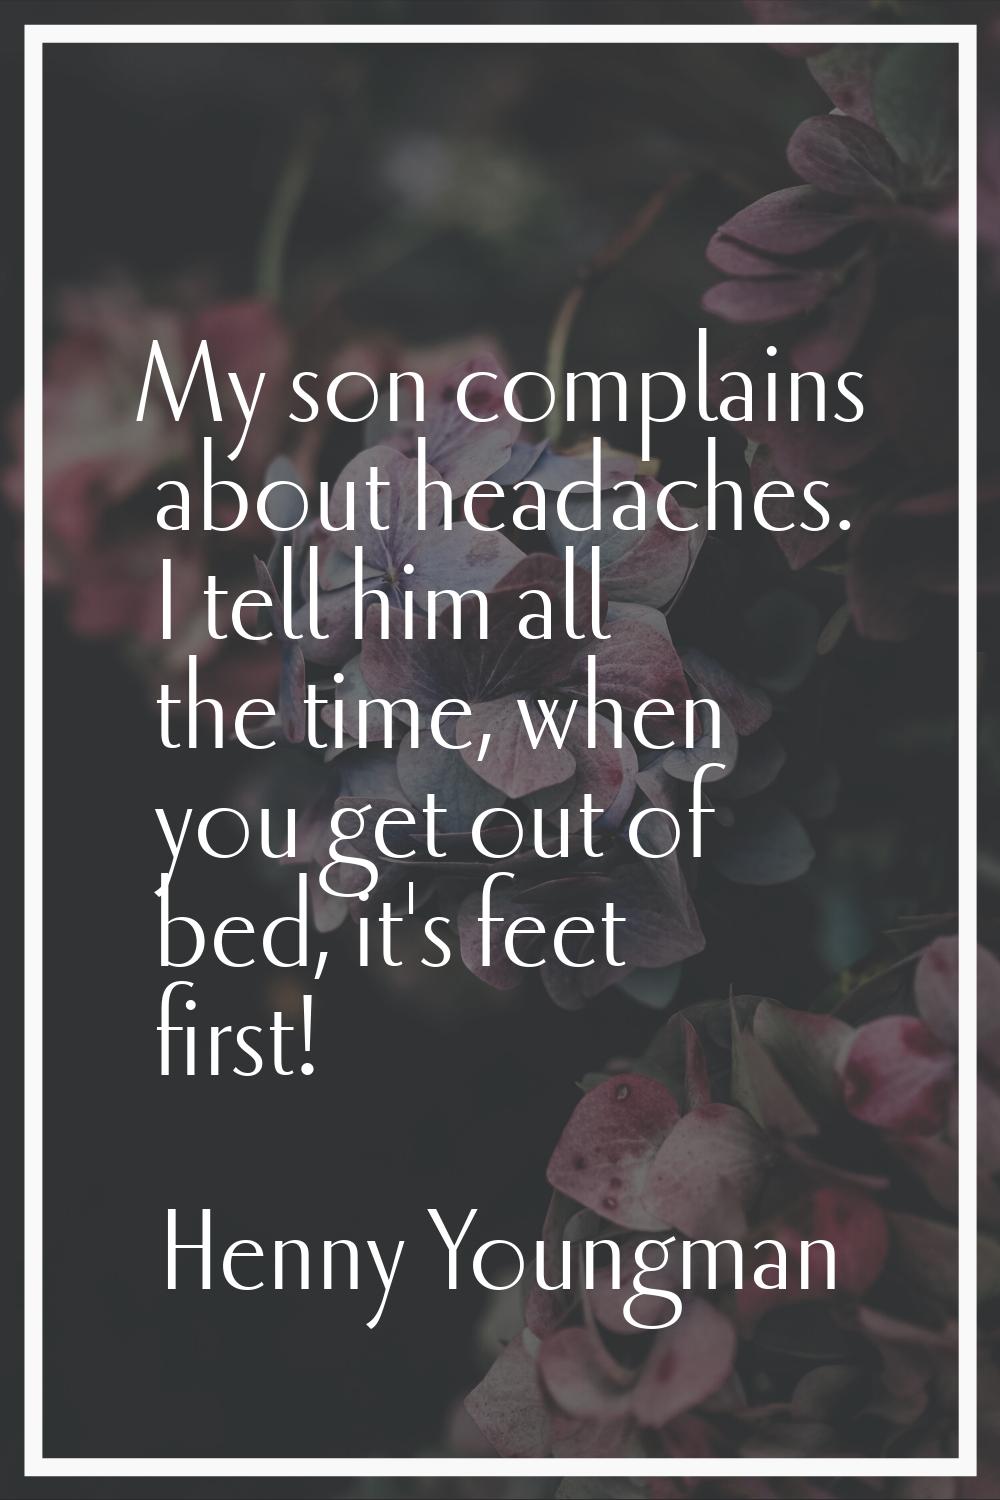 My son complains about headaches. I tell him all the time, when you get out of bed, it's feet first